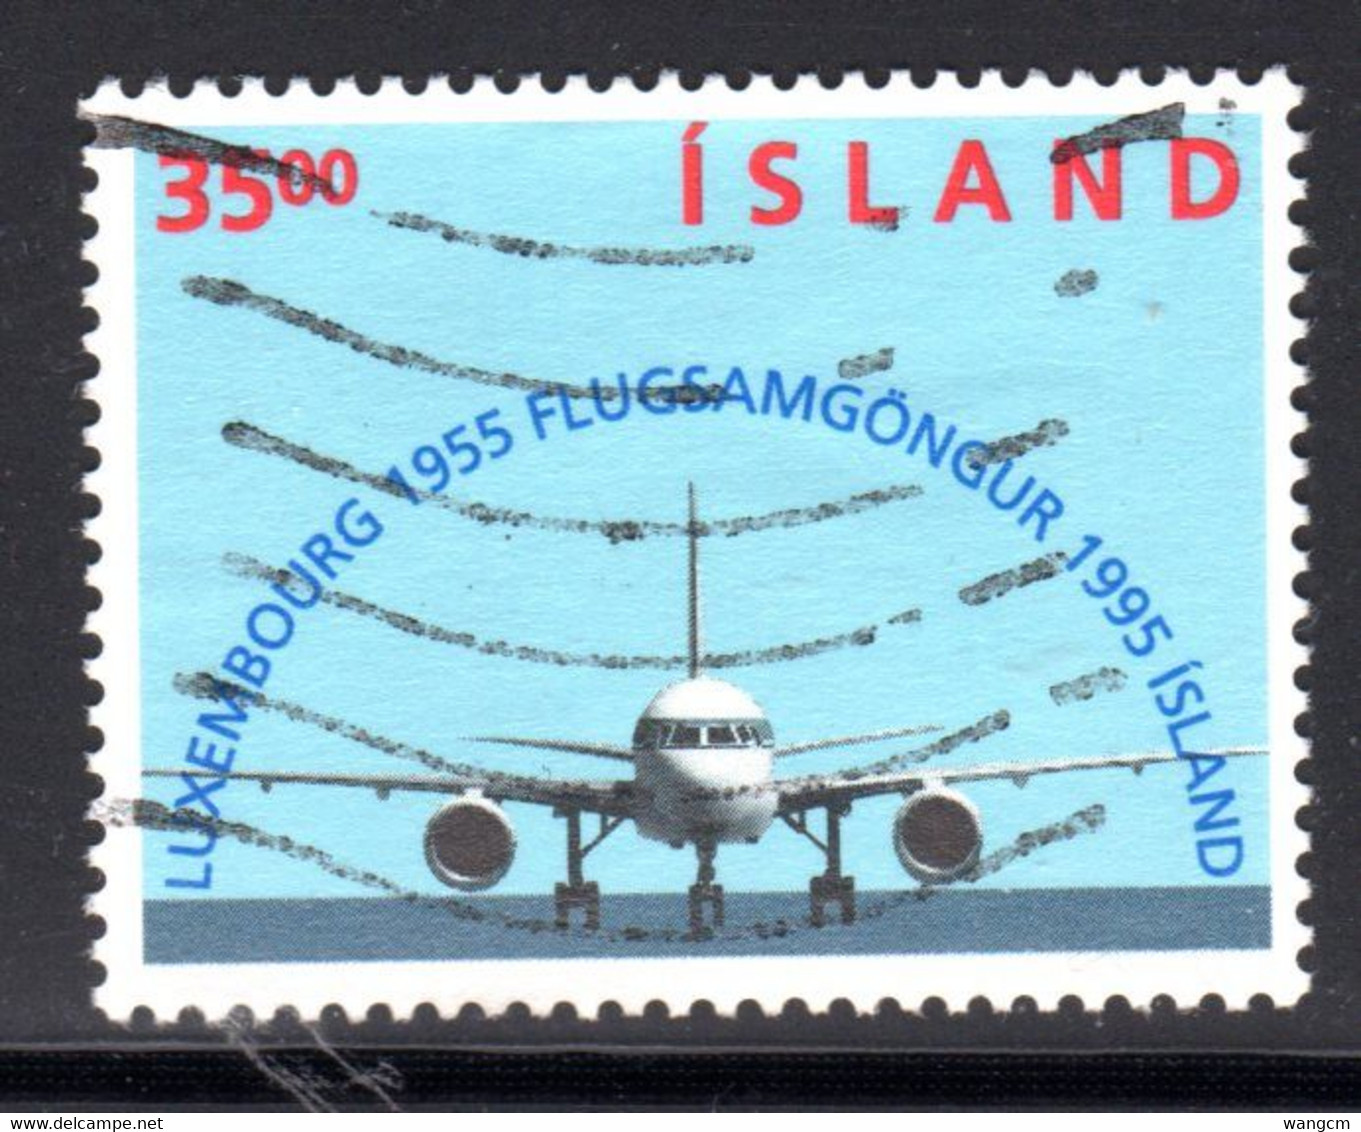 Iceland 1995 35k Iceland - Luxembourg Air Link Fine Used - Gebraucht